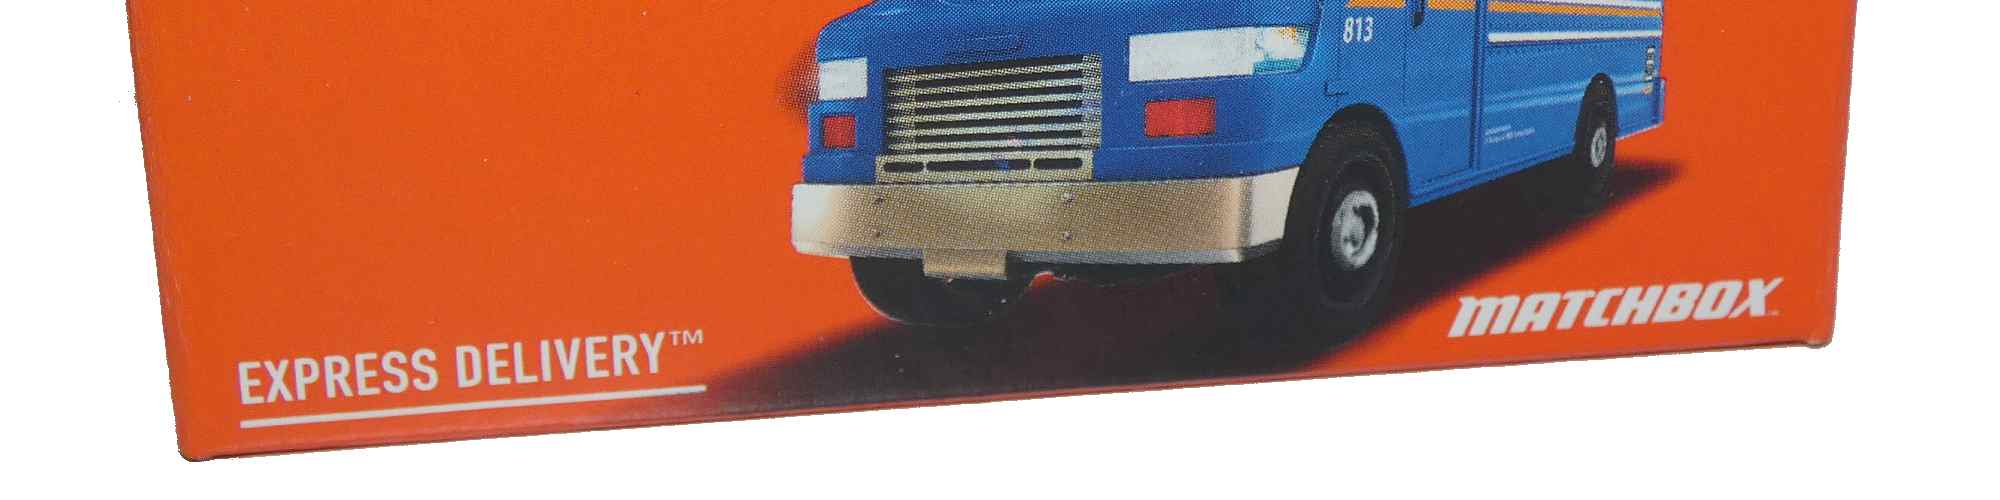 Matchbox – Express Delivery